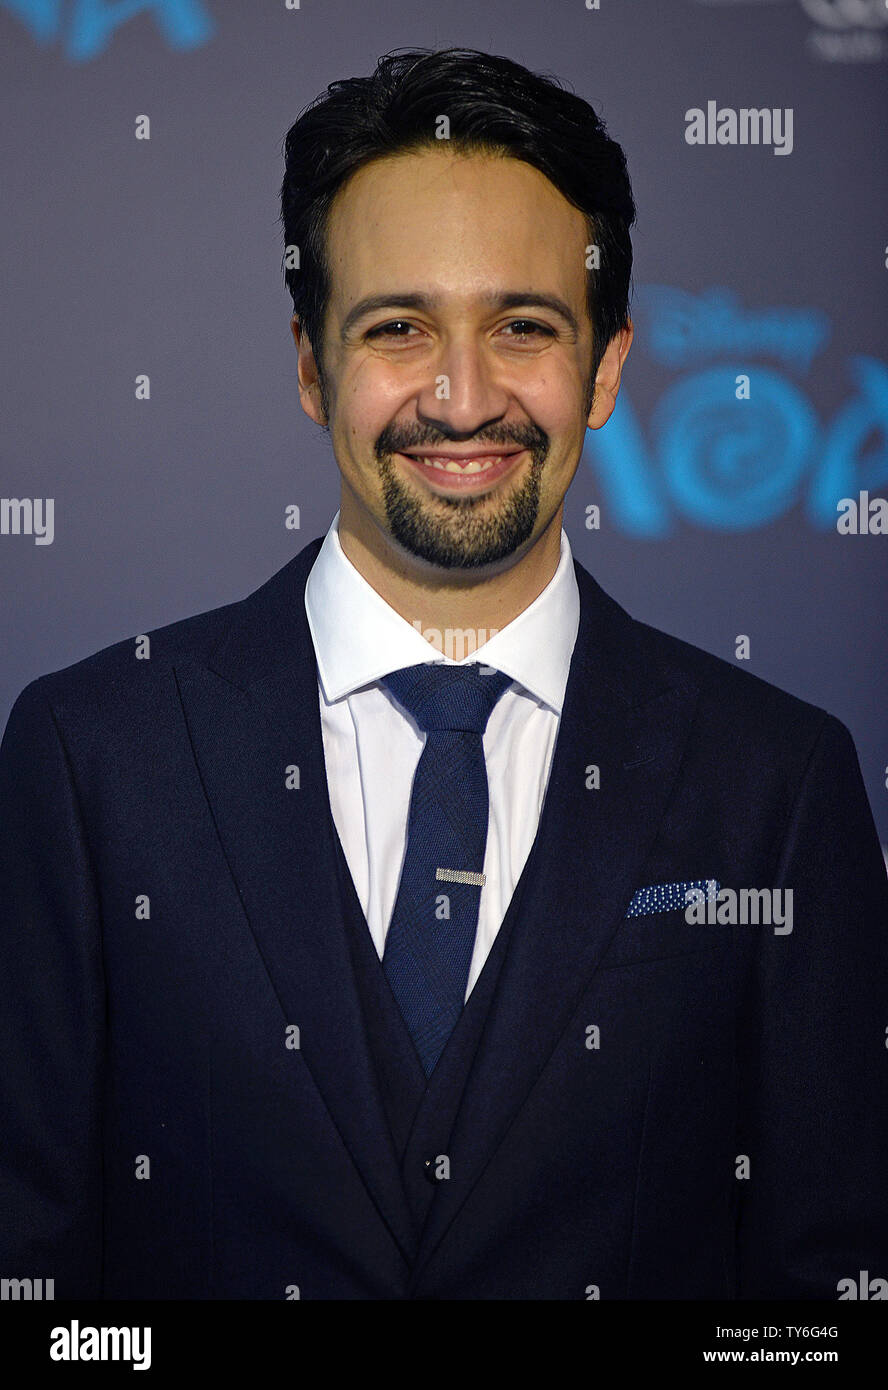 Actor and composer Lin-Manuel Miranda arrives at the world premiere of Walt Disney Animation Studios' 'Moana' at Hollywood's El Capitan Theatre in Los Angeles, California on November 14, 2016. Photo by Christine Chew/UPI Stock Photo